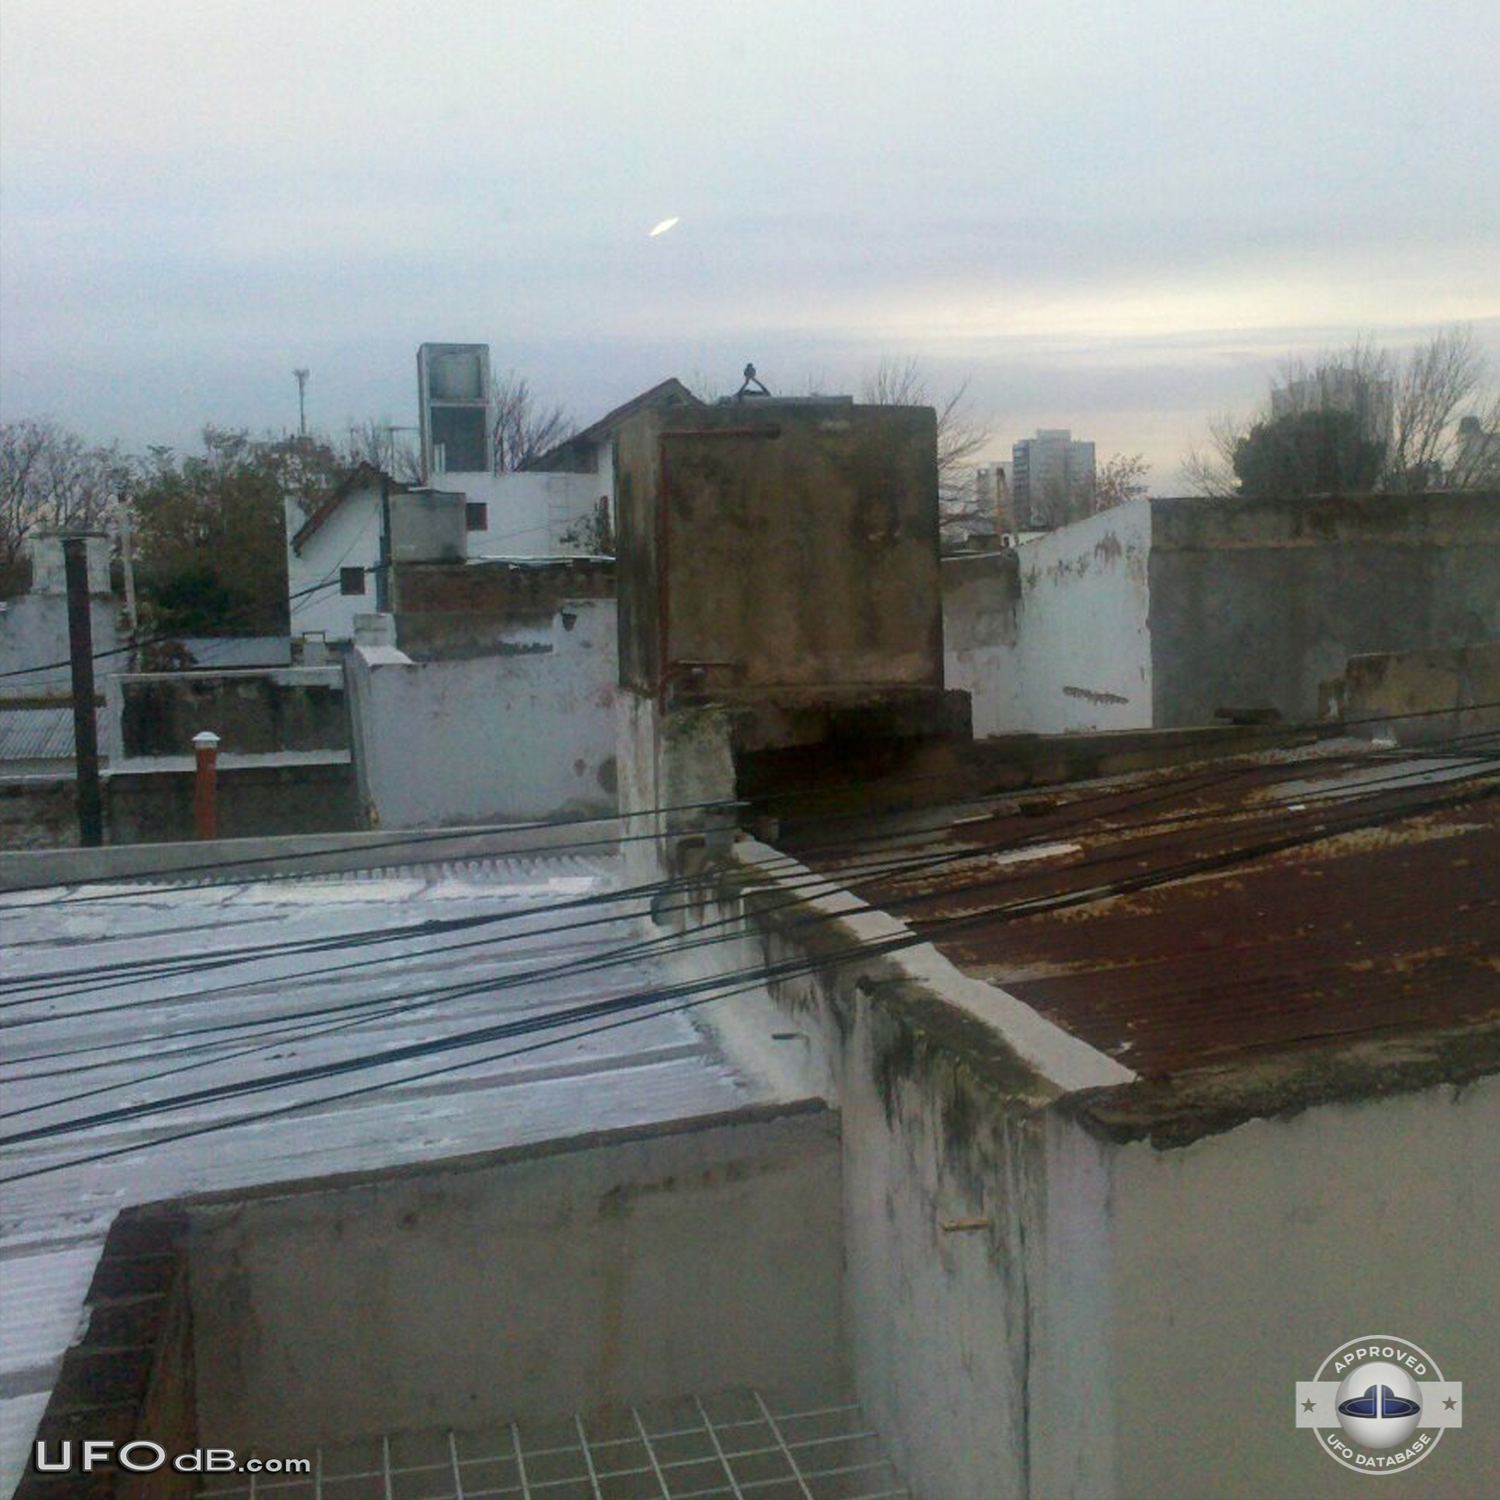 White Saucer UFO caught on photo in Bahia Blanca, Buenos Aires - 2012 UFO Picture #522-1